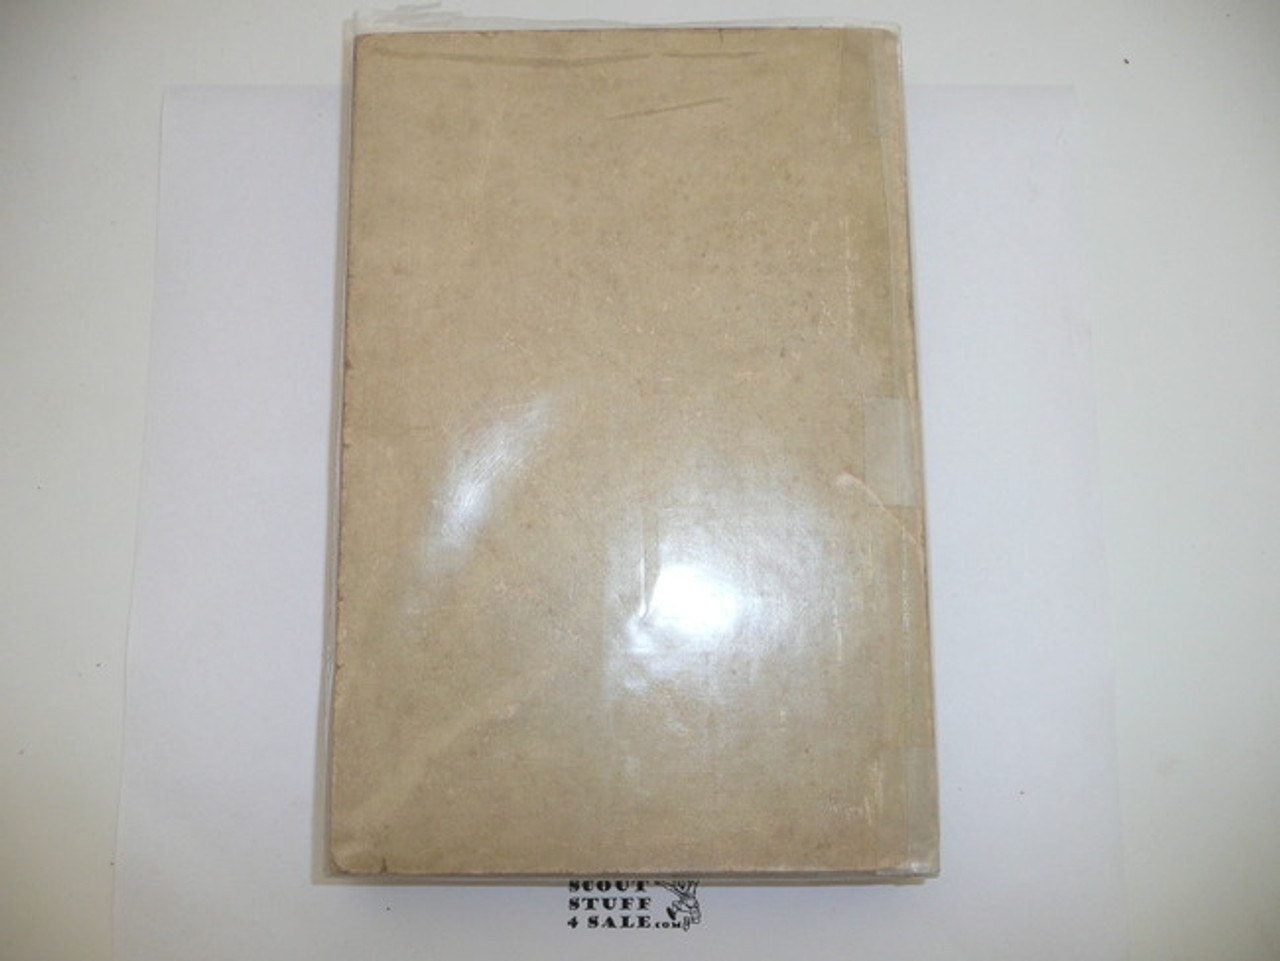 1918 Boy Scout Handbook, Second Edition, Nineteenth Printing, "PRICE 50 CENTS" on cover and cover nearly white, minimal wear